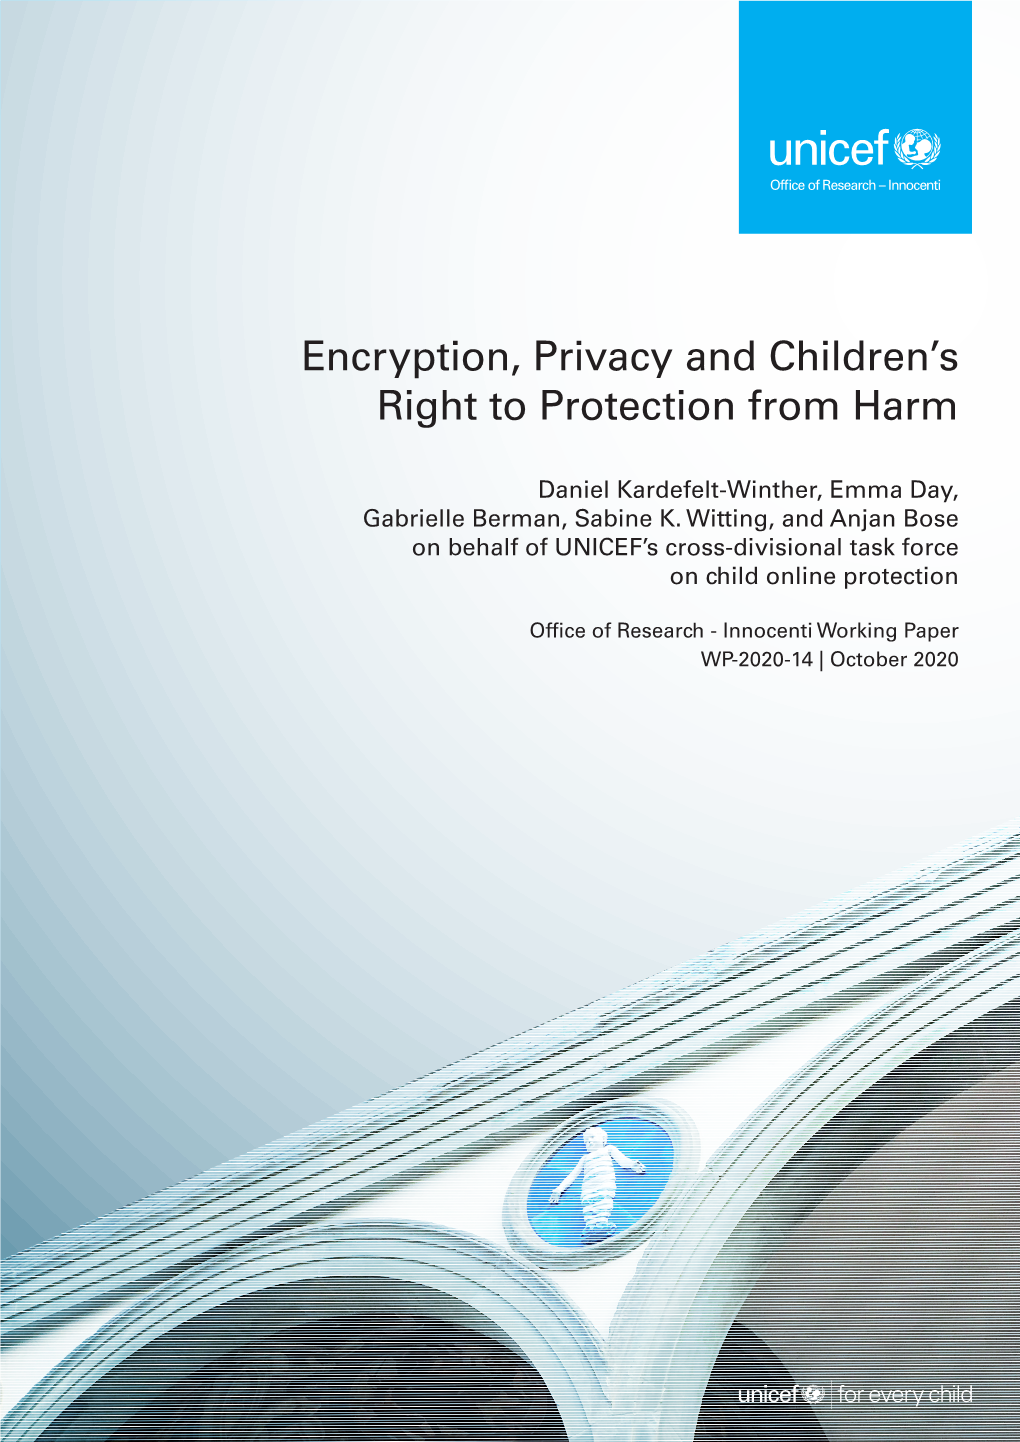 Encryption, Privacy and Children's Right to Protection from Harm